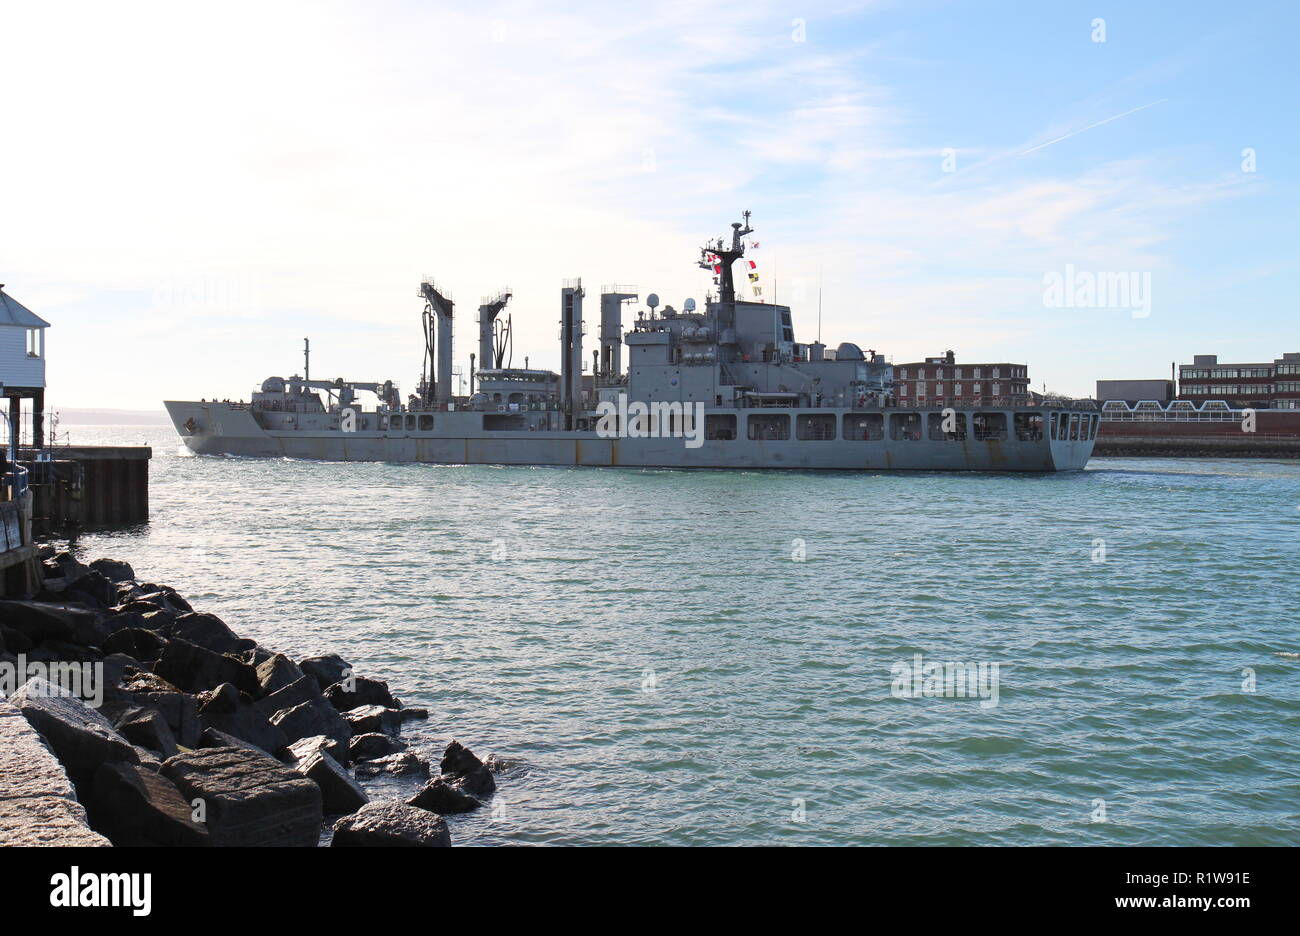 The Republic of Korea support ship Daocheong leaving Portsmouth Harbour, UK on 14th November 2018. Stock Photo